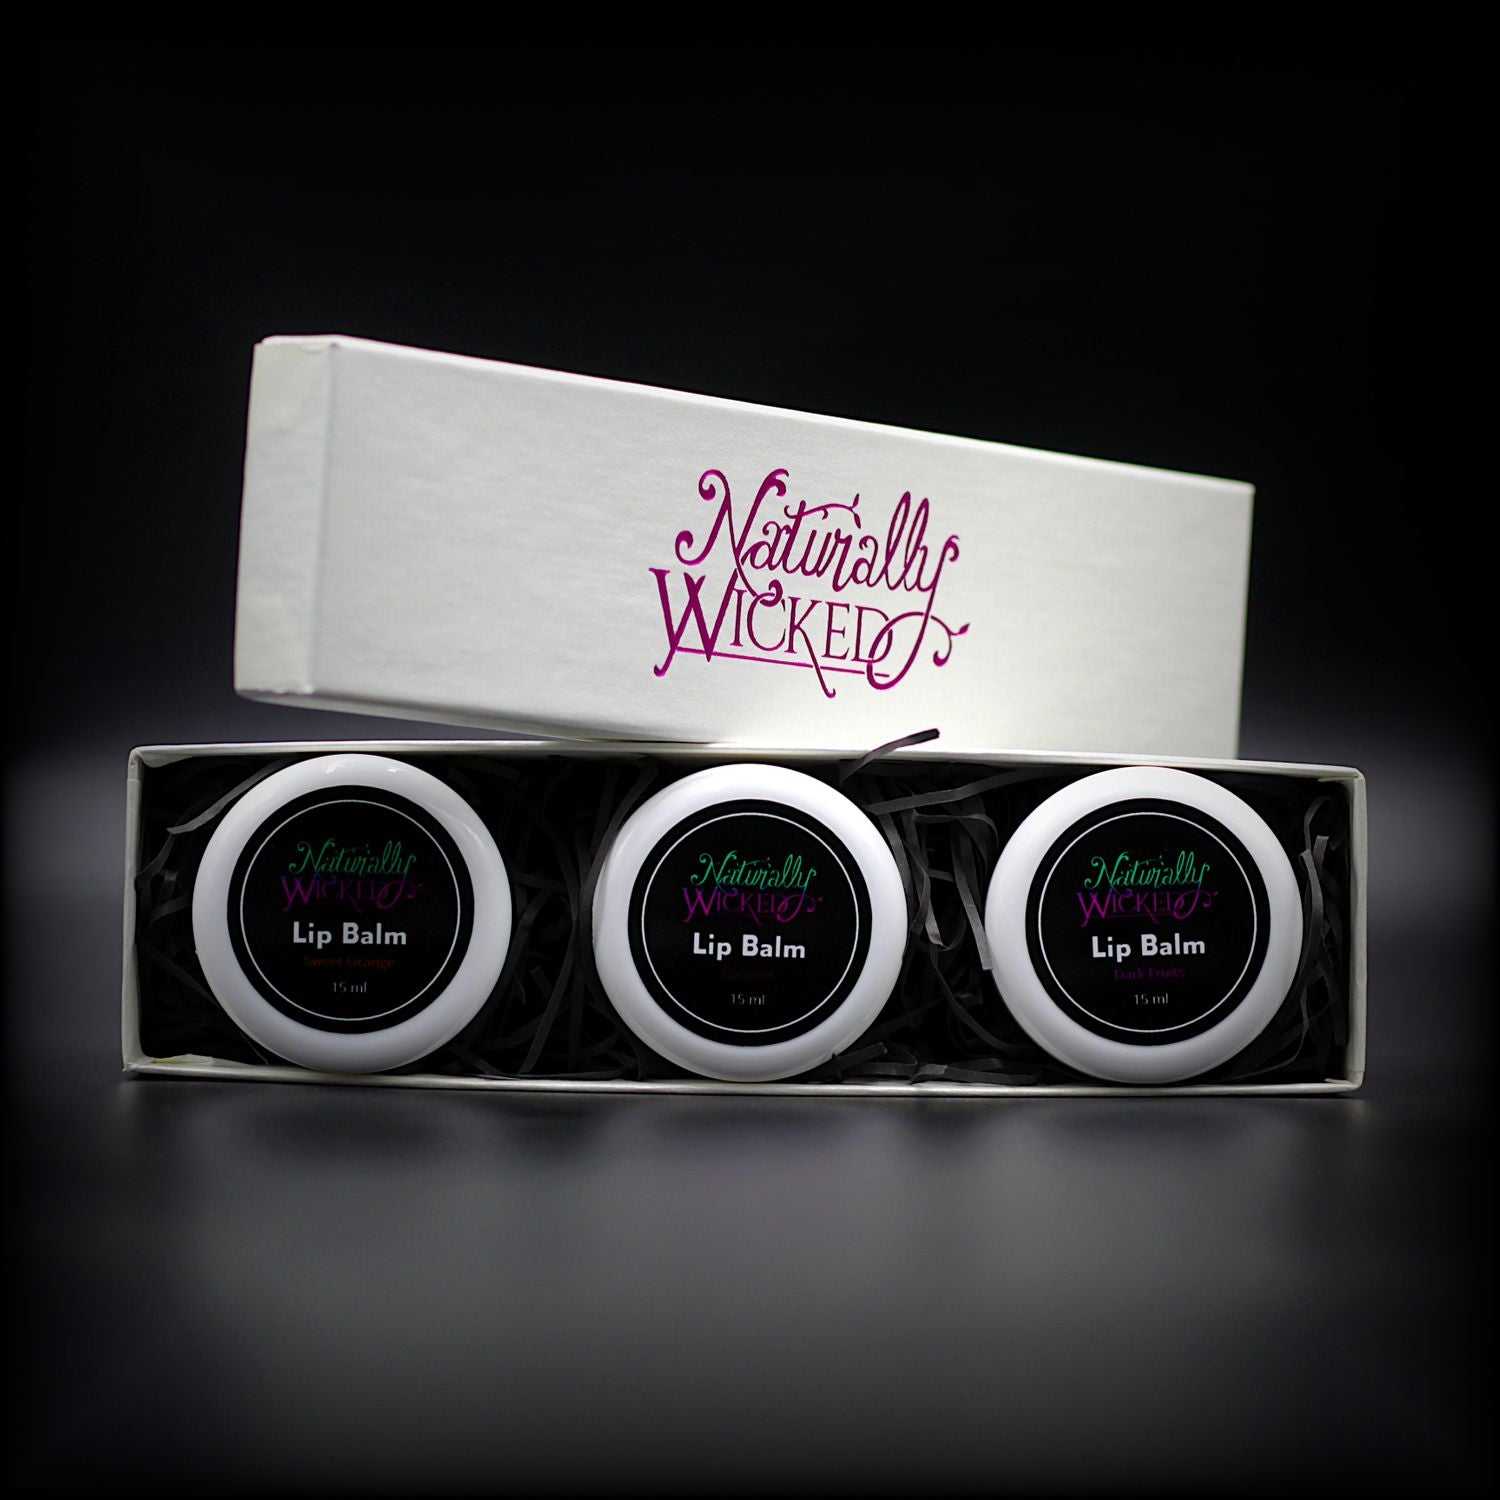 Naturally Wicked Lip Balm Trio Inner Box Revealed With Lids Of Orange, Dark Fruit & Coconut Lip Balm Peaking Out Amongst Luxury Gift Packaging